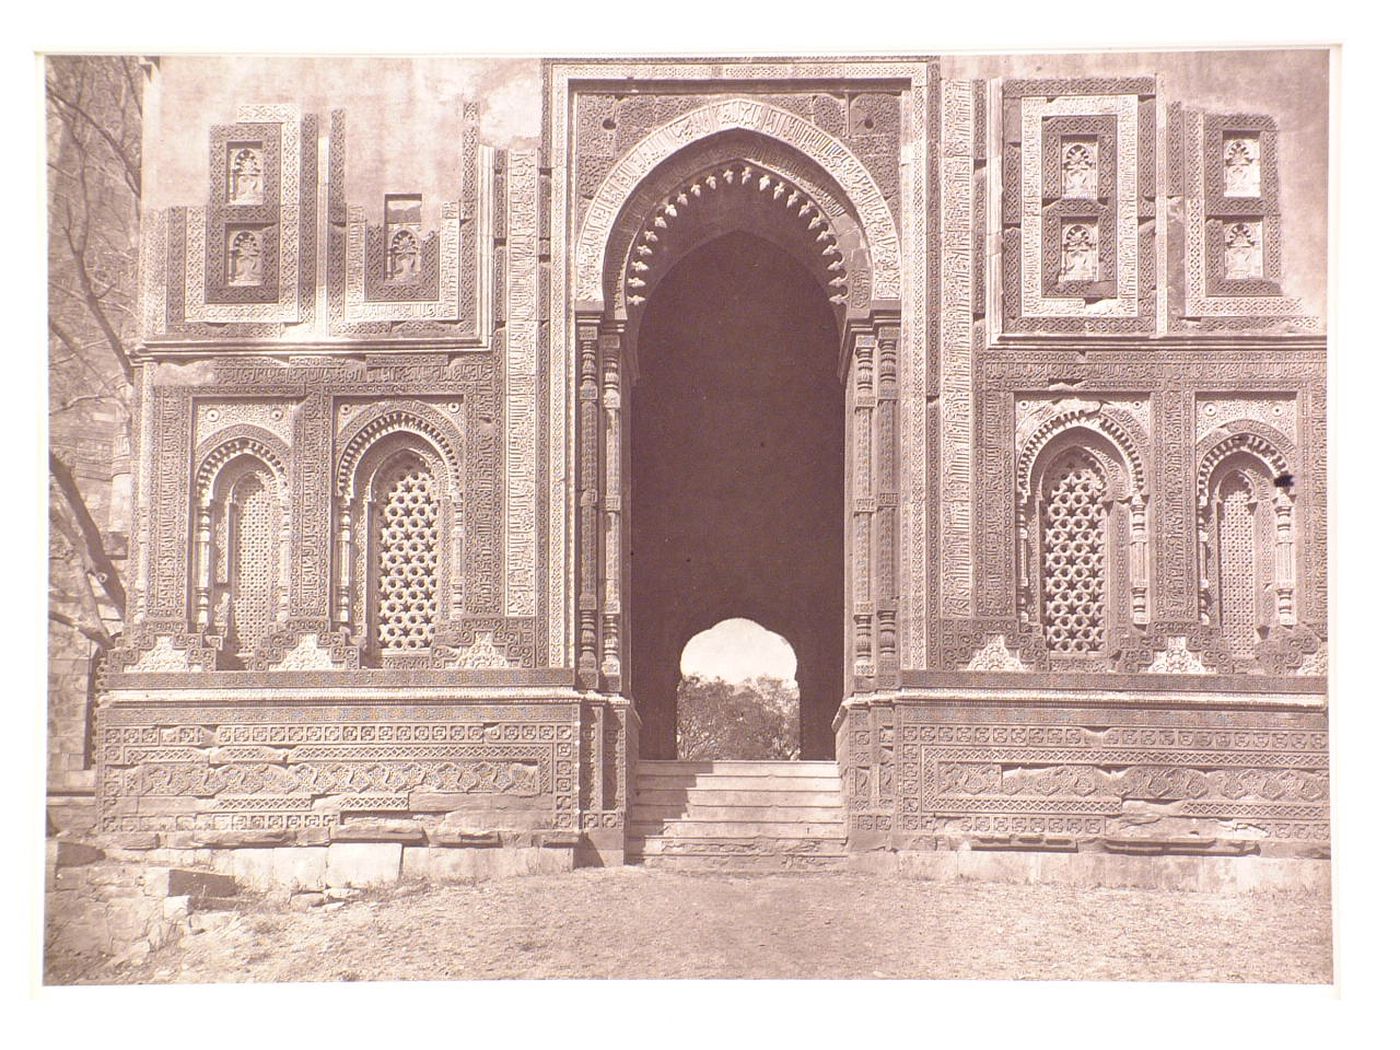 Partial view of the southern façade and entrance of the 'Ala'i Darvaza [Lofty Gate], Quwwat al-Islam [Might of Islam] Mosque Complex, Delhi, India